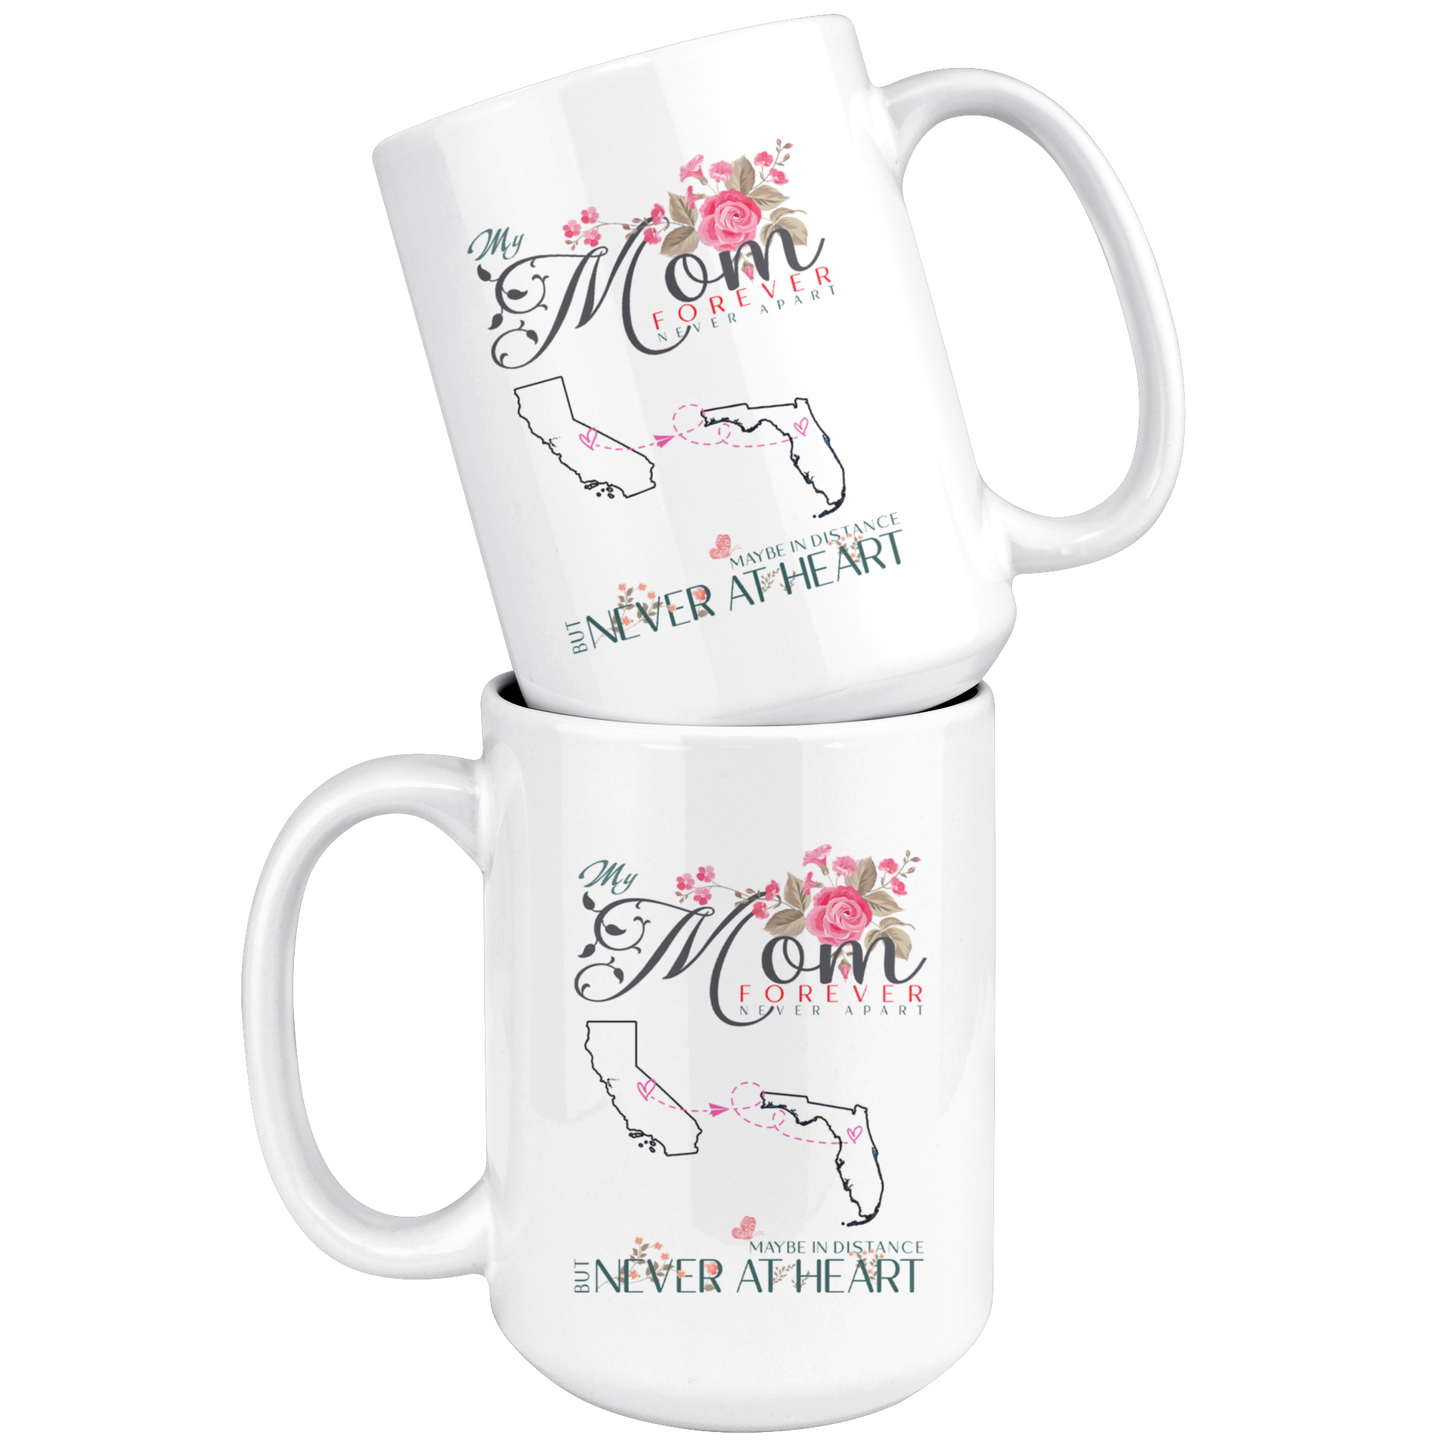 M-20321571-sp-23608 - [ California | Florida ]Personalized Mothers Day Coffee Mug - My Mom Forever Never A